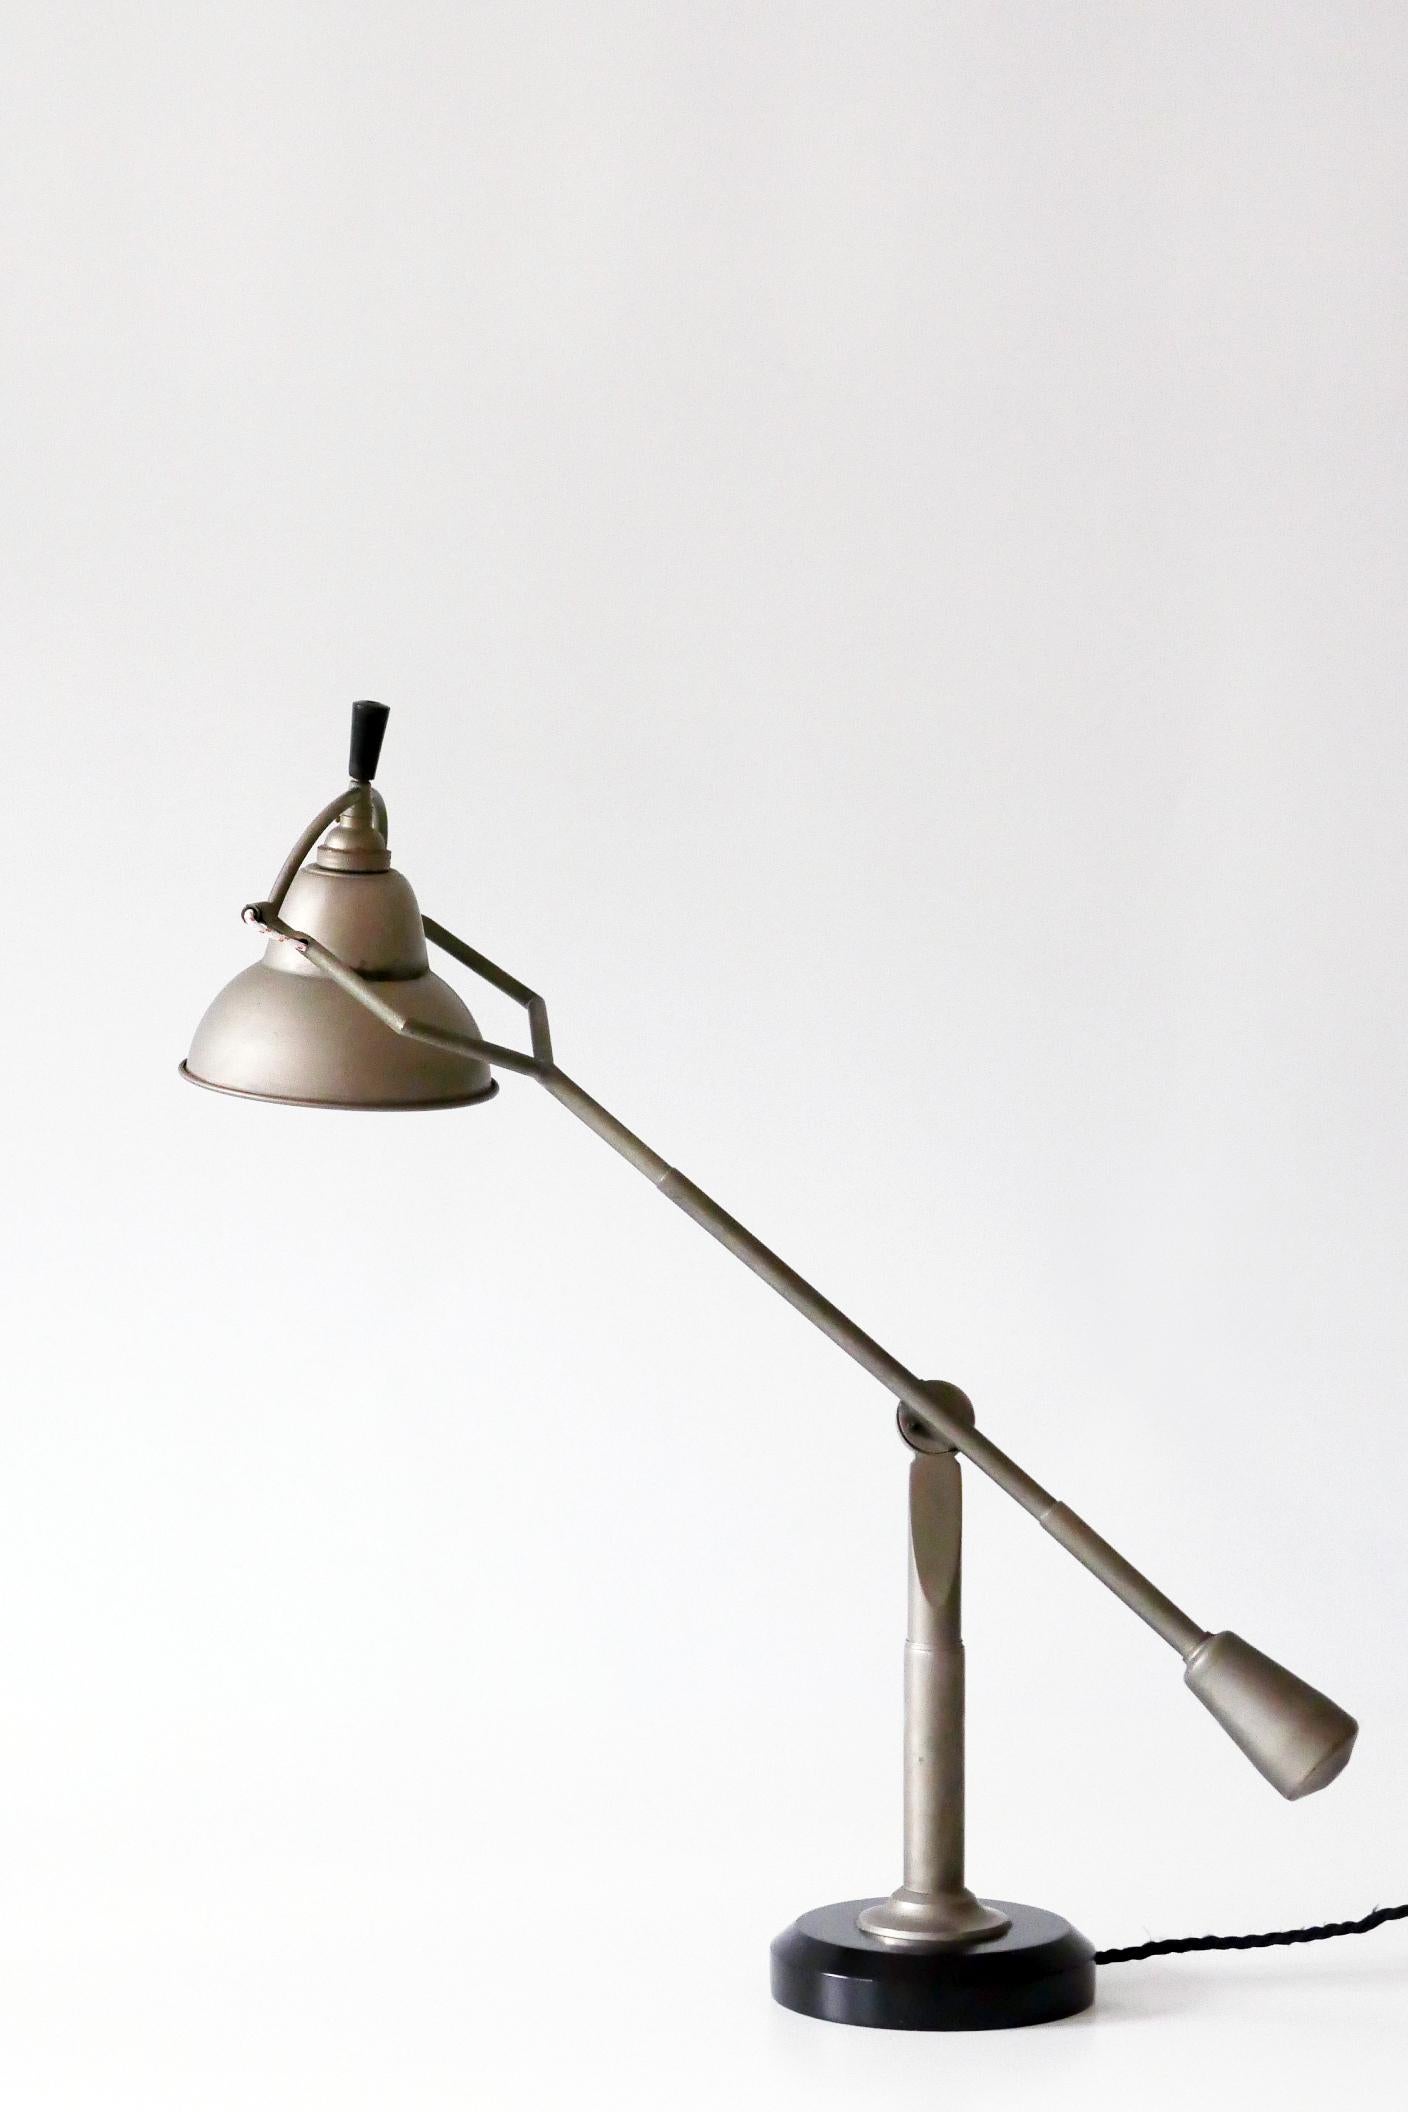 Modernist Counterbalance Table Lamp by Edouard-Wilfred Buquet, 1927, France For Sale 4